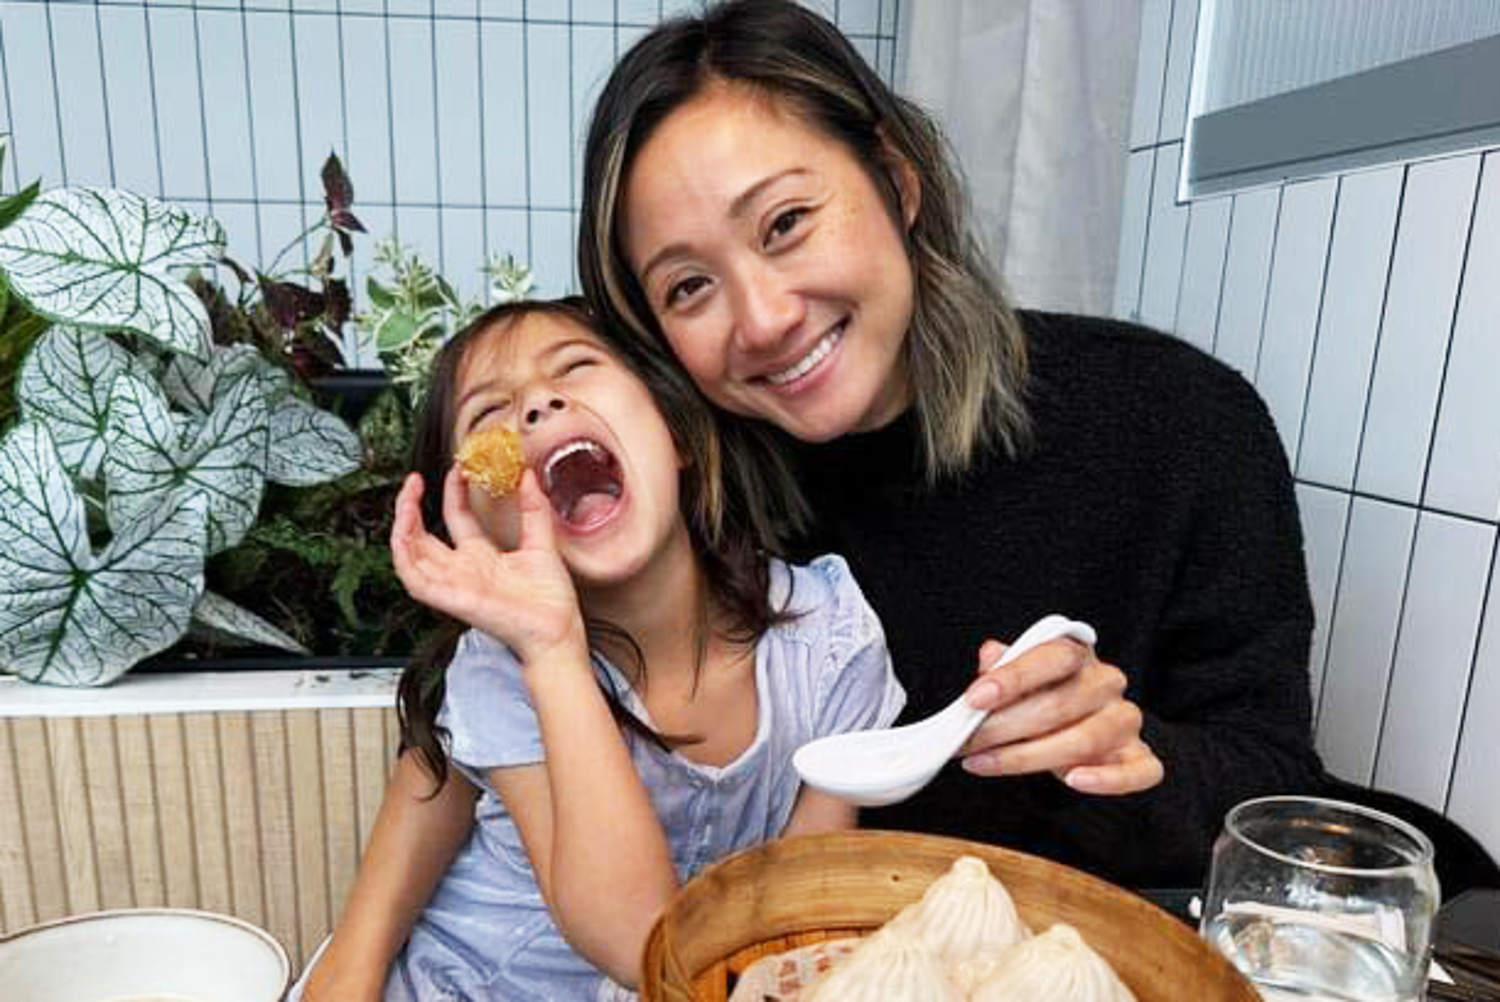 The dissolution of ‘Tiger Moms’ and the new face of Asian American parenting